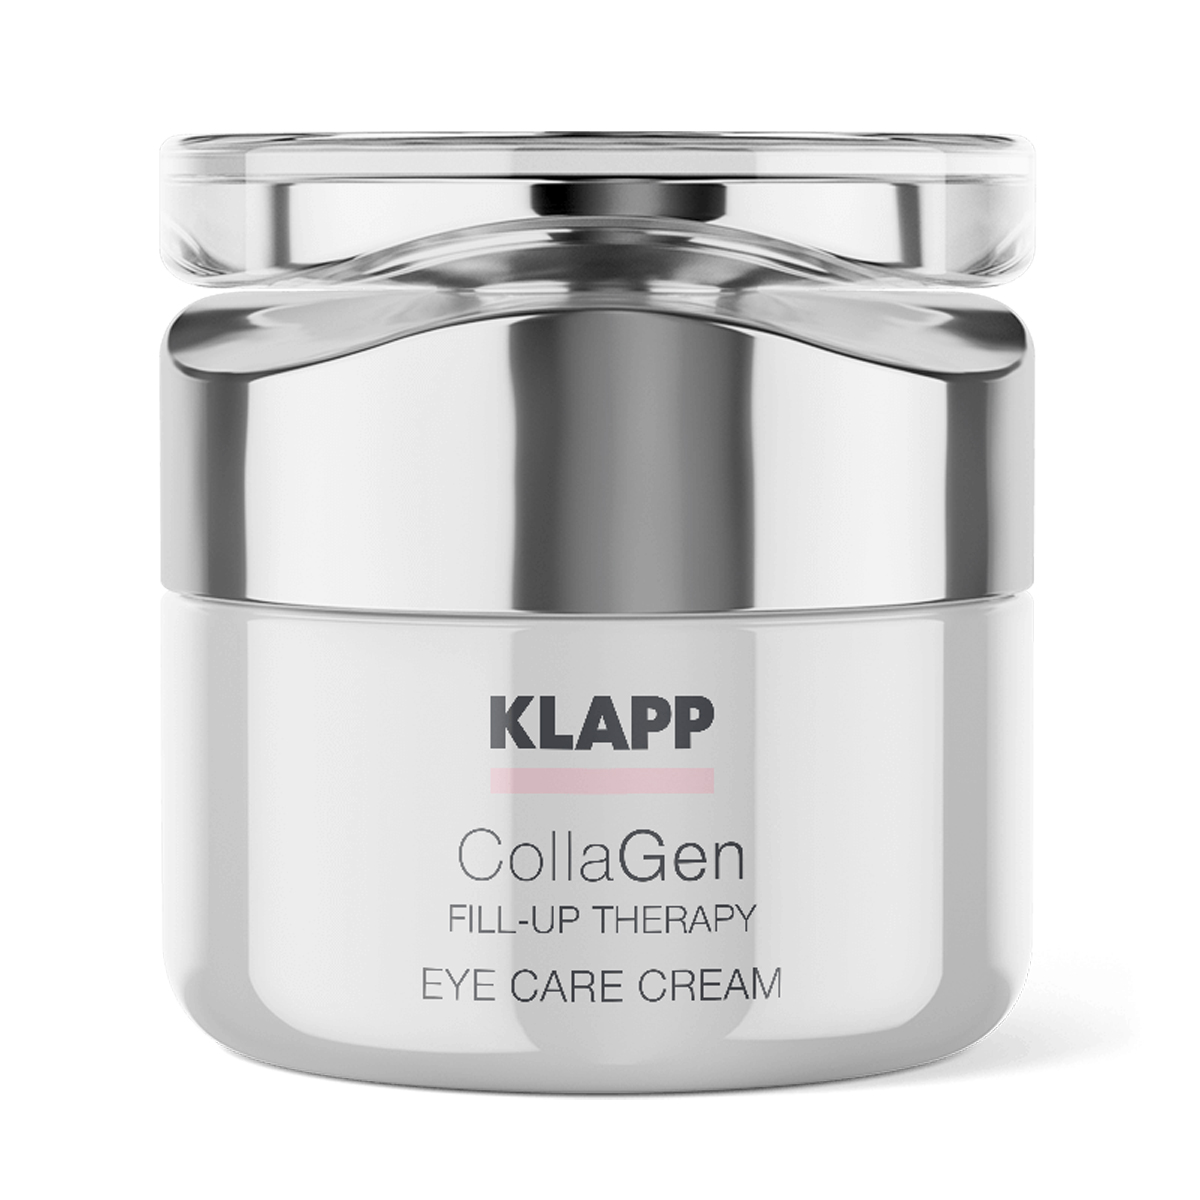 KLAPP Collagen Eye Care Cream 20 ml Fill Up Therapy